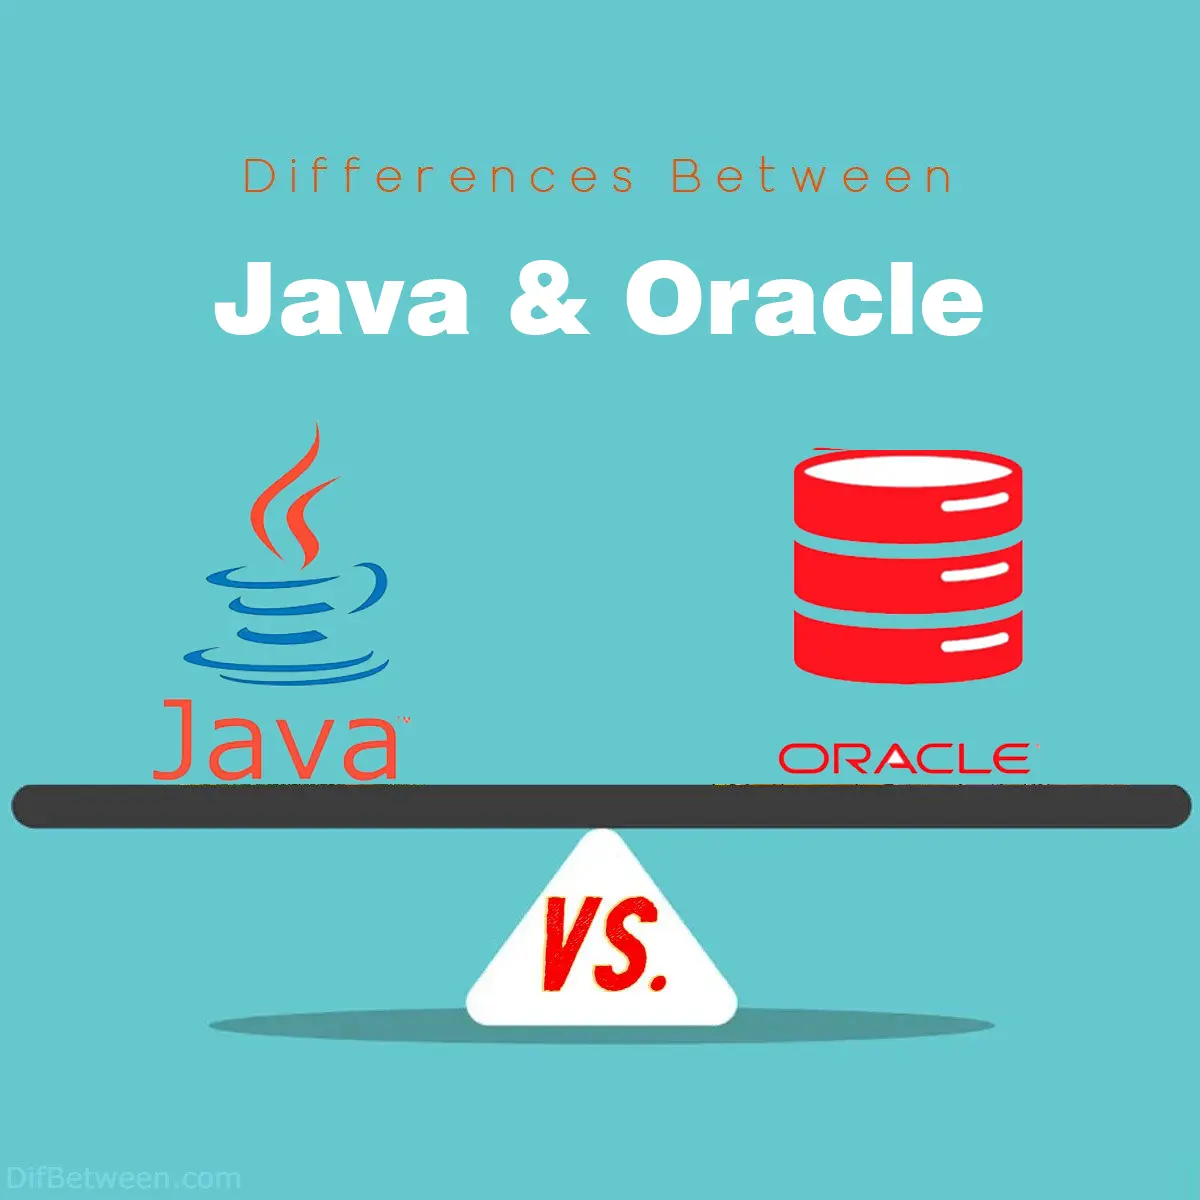 Differences Between Java and Oracle